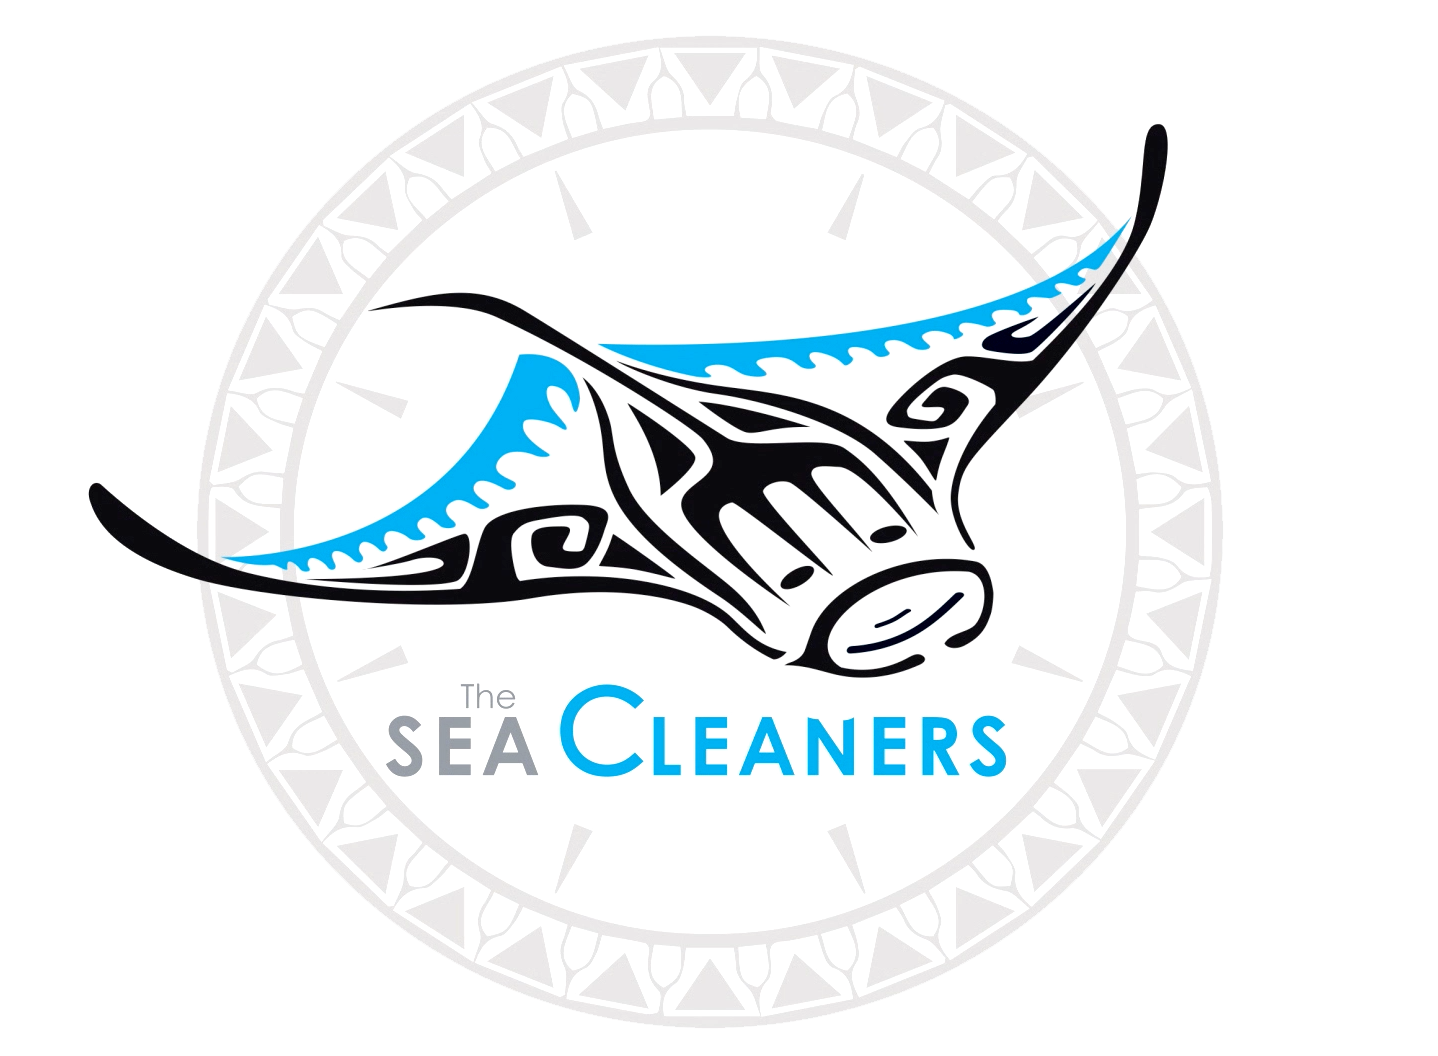 https://www.theseacleaners.org/